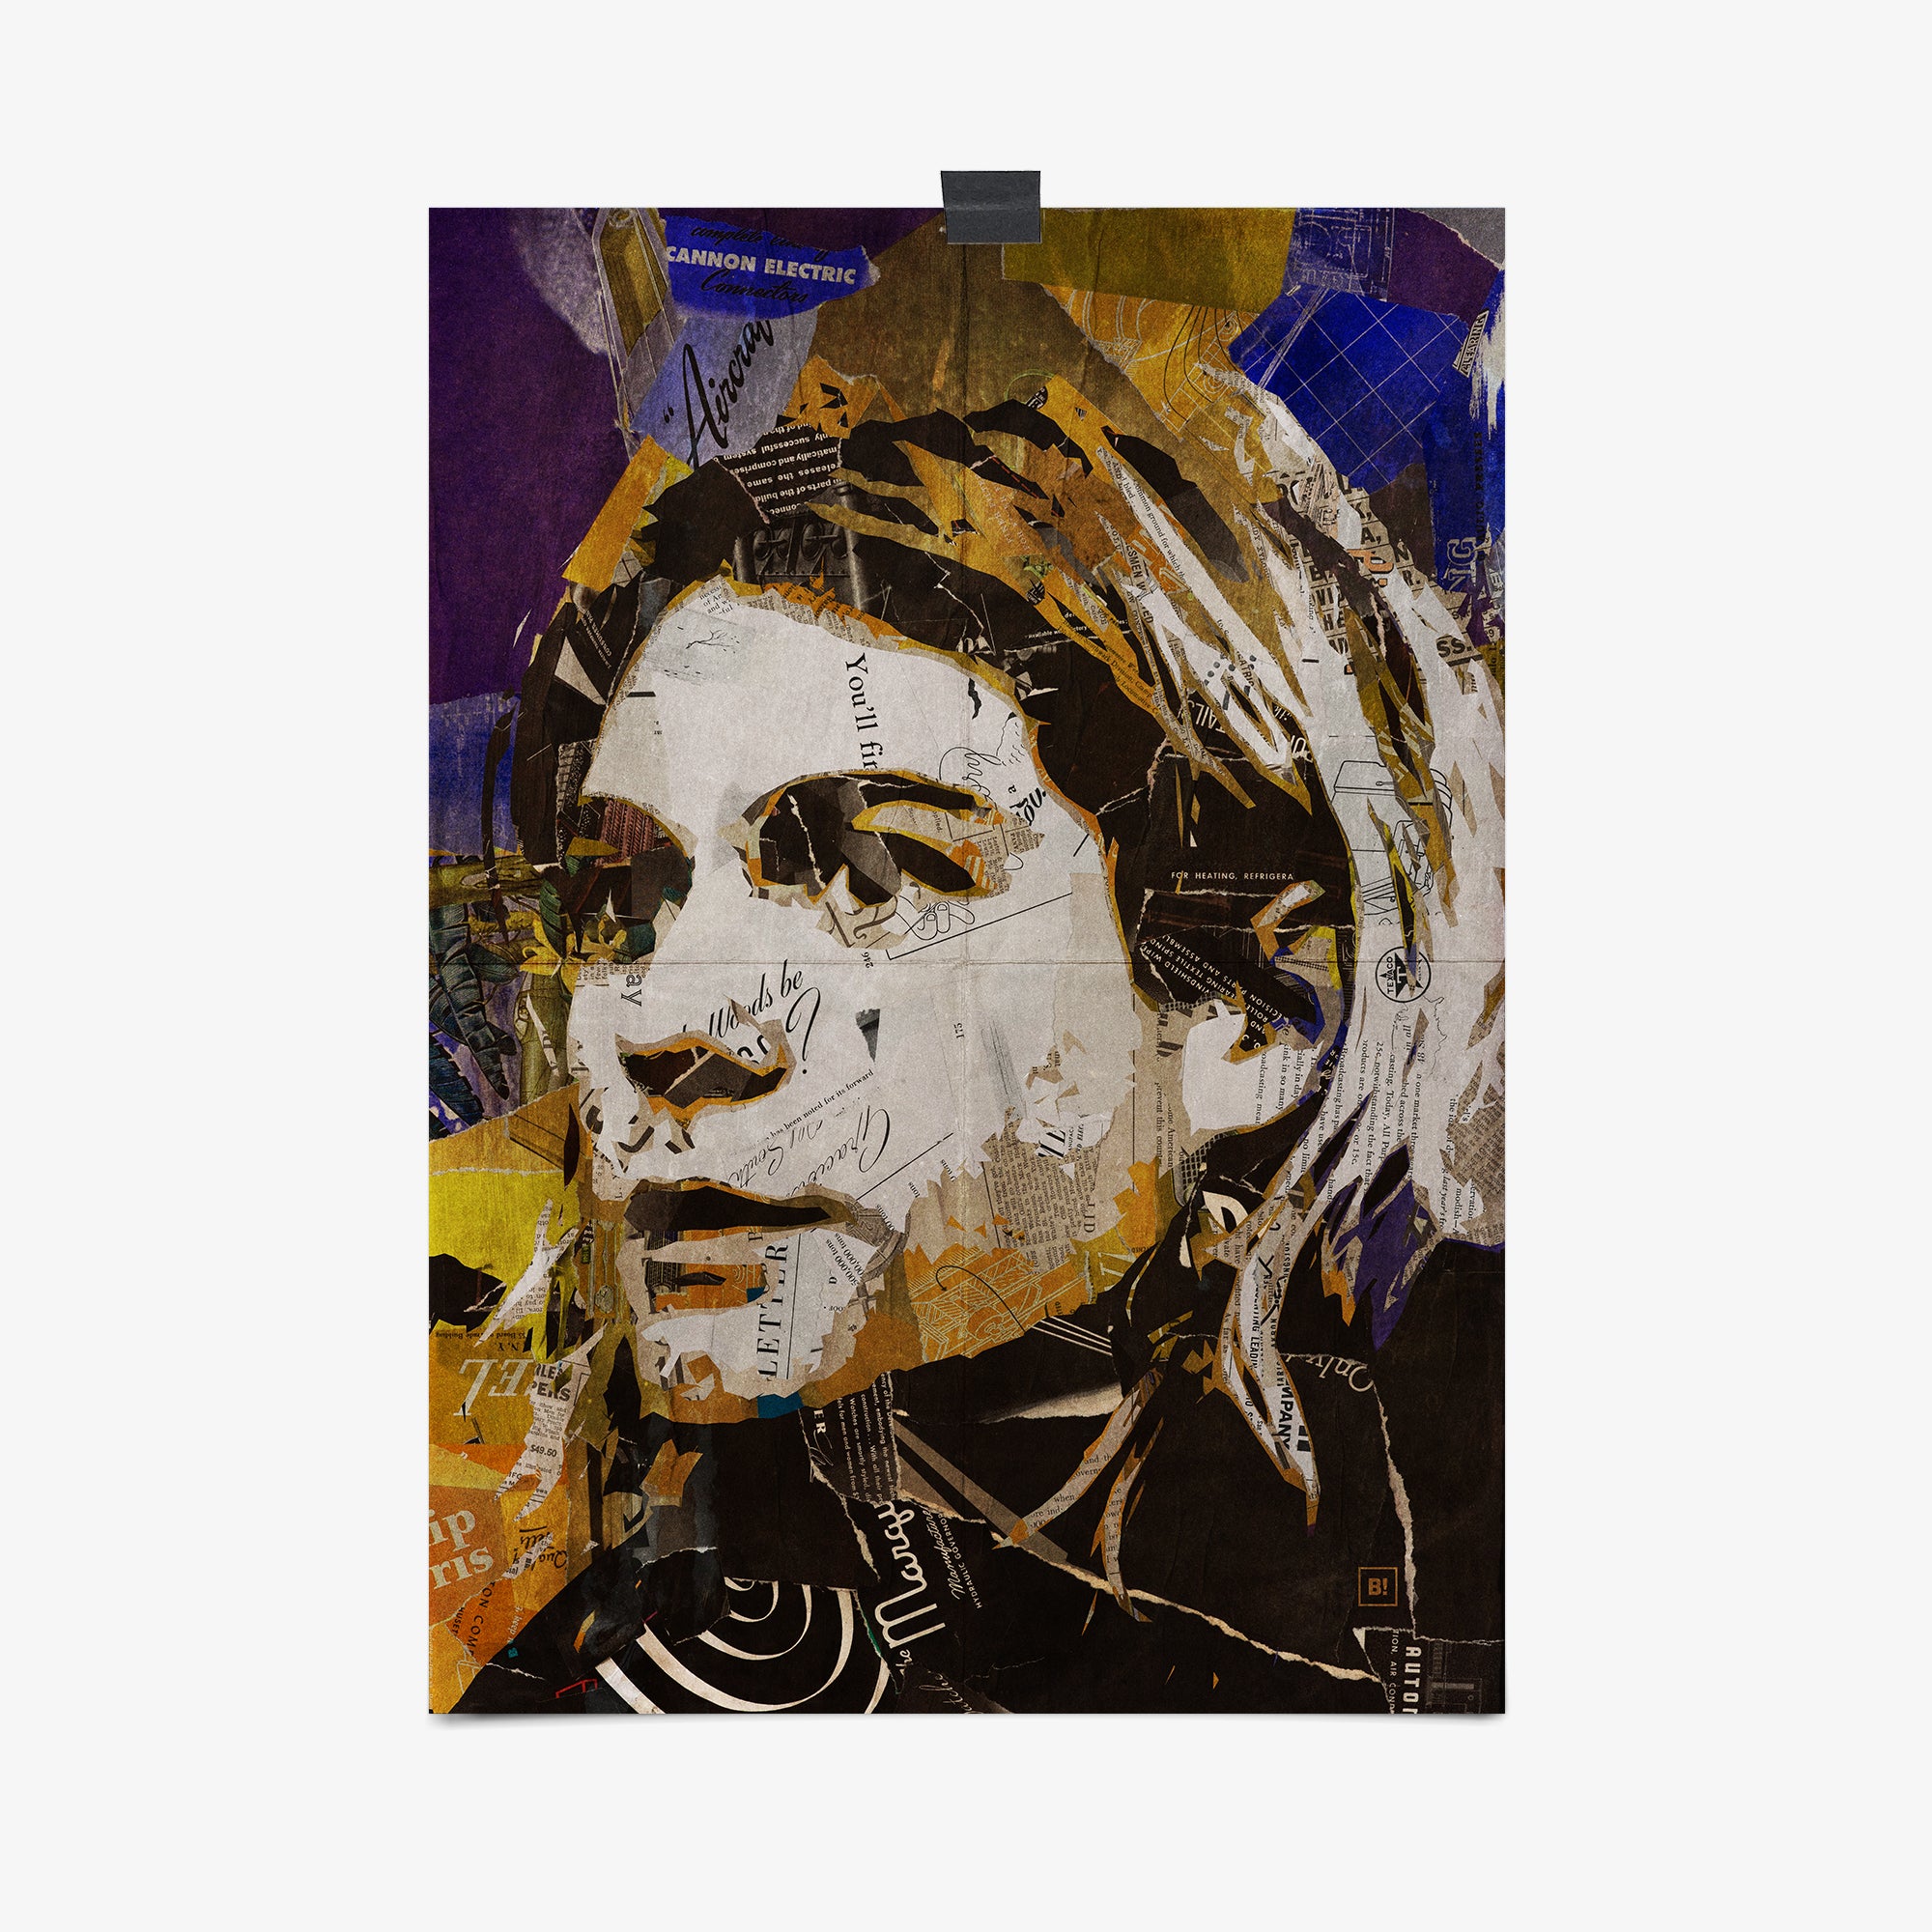 Be inspired by our iconic collage portrait art print of Kurt Cobain. This artwork was printed using the giclée process on archival acid-free paper, capturing its timeless beauty in every detail.